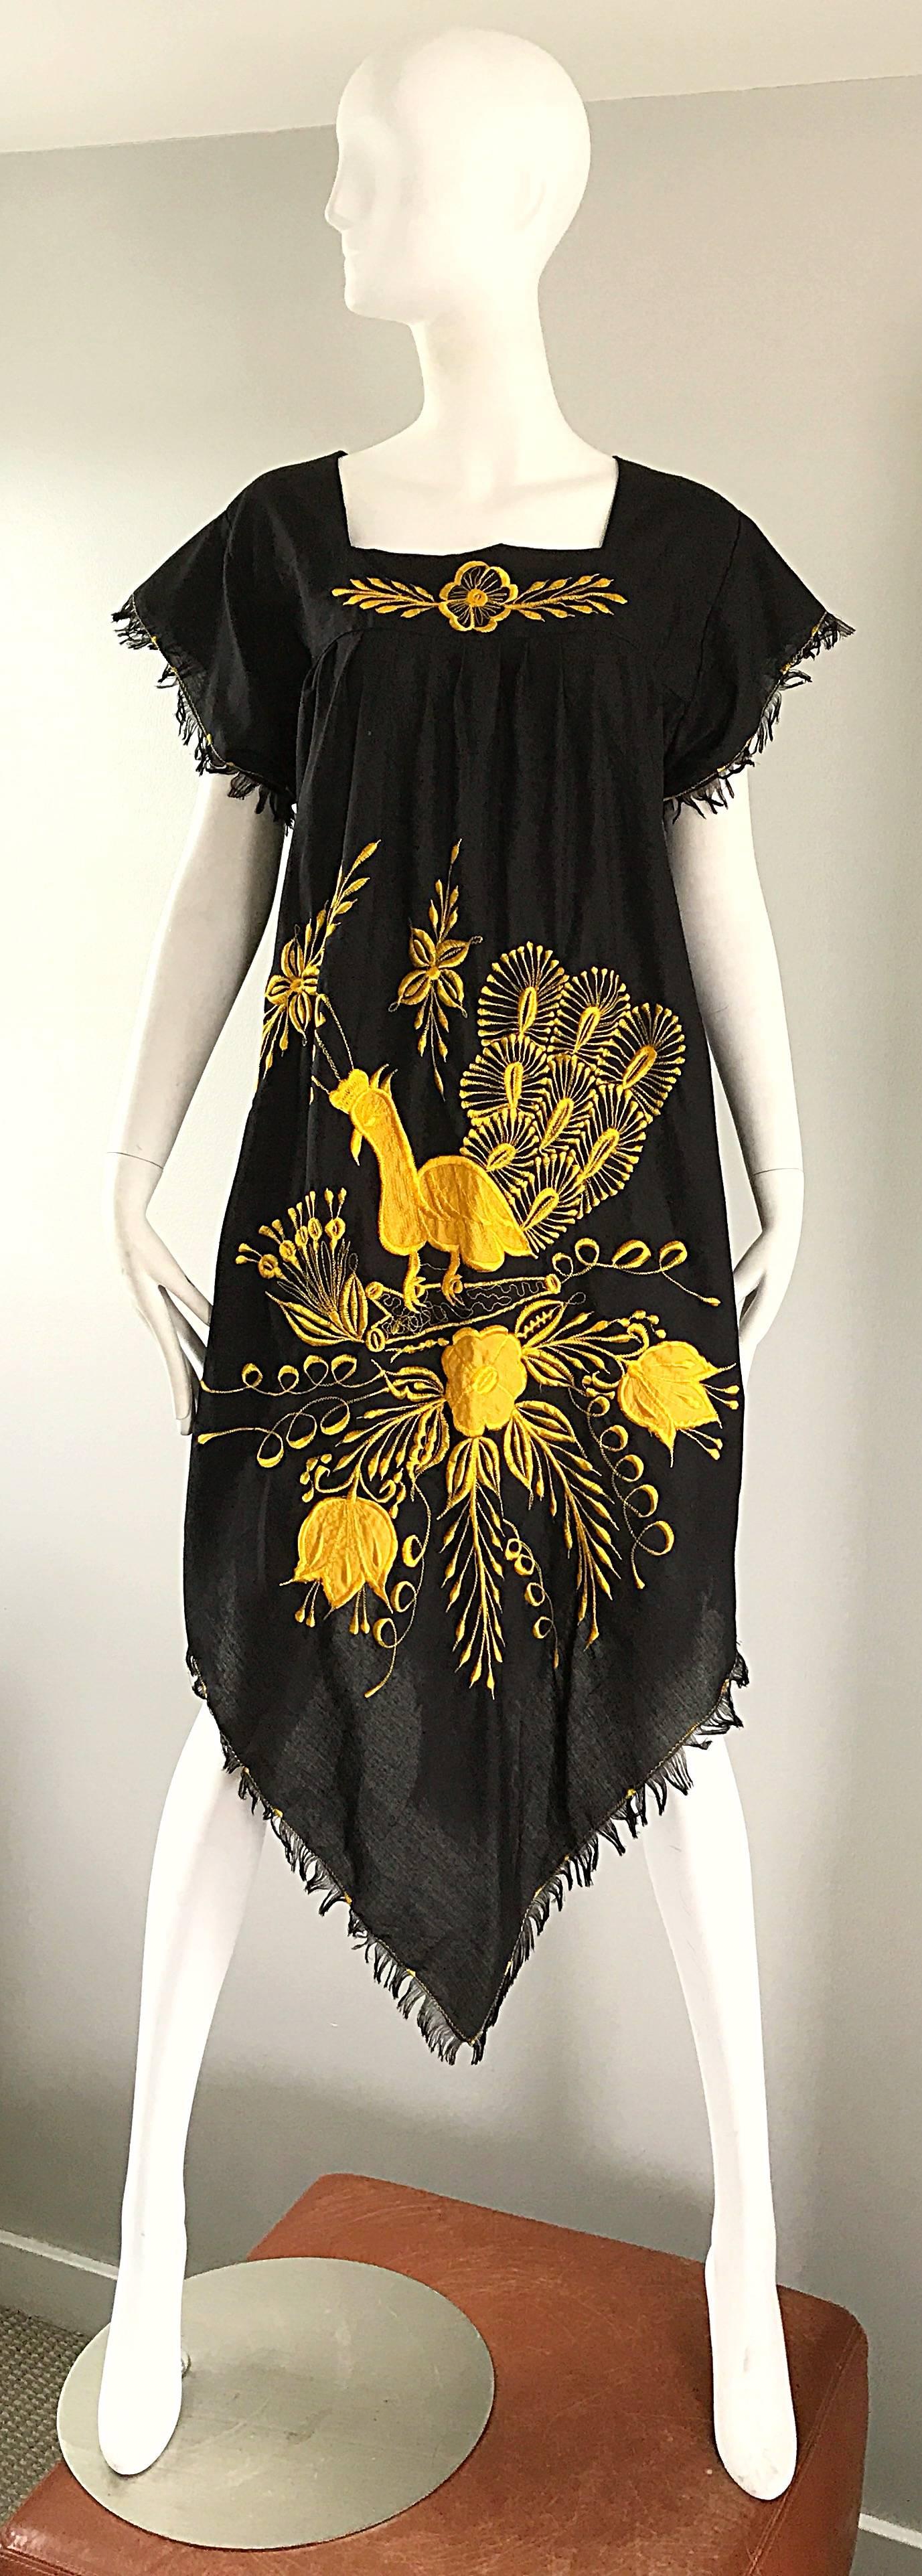 1970s Black and Yellow Handkerchief Scarf Hem Mexican Embrodiered Caftan Dress 6